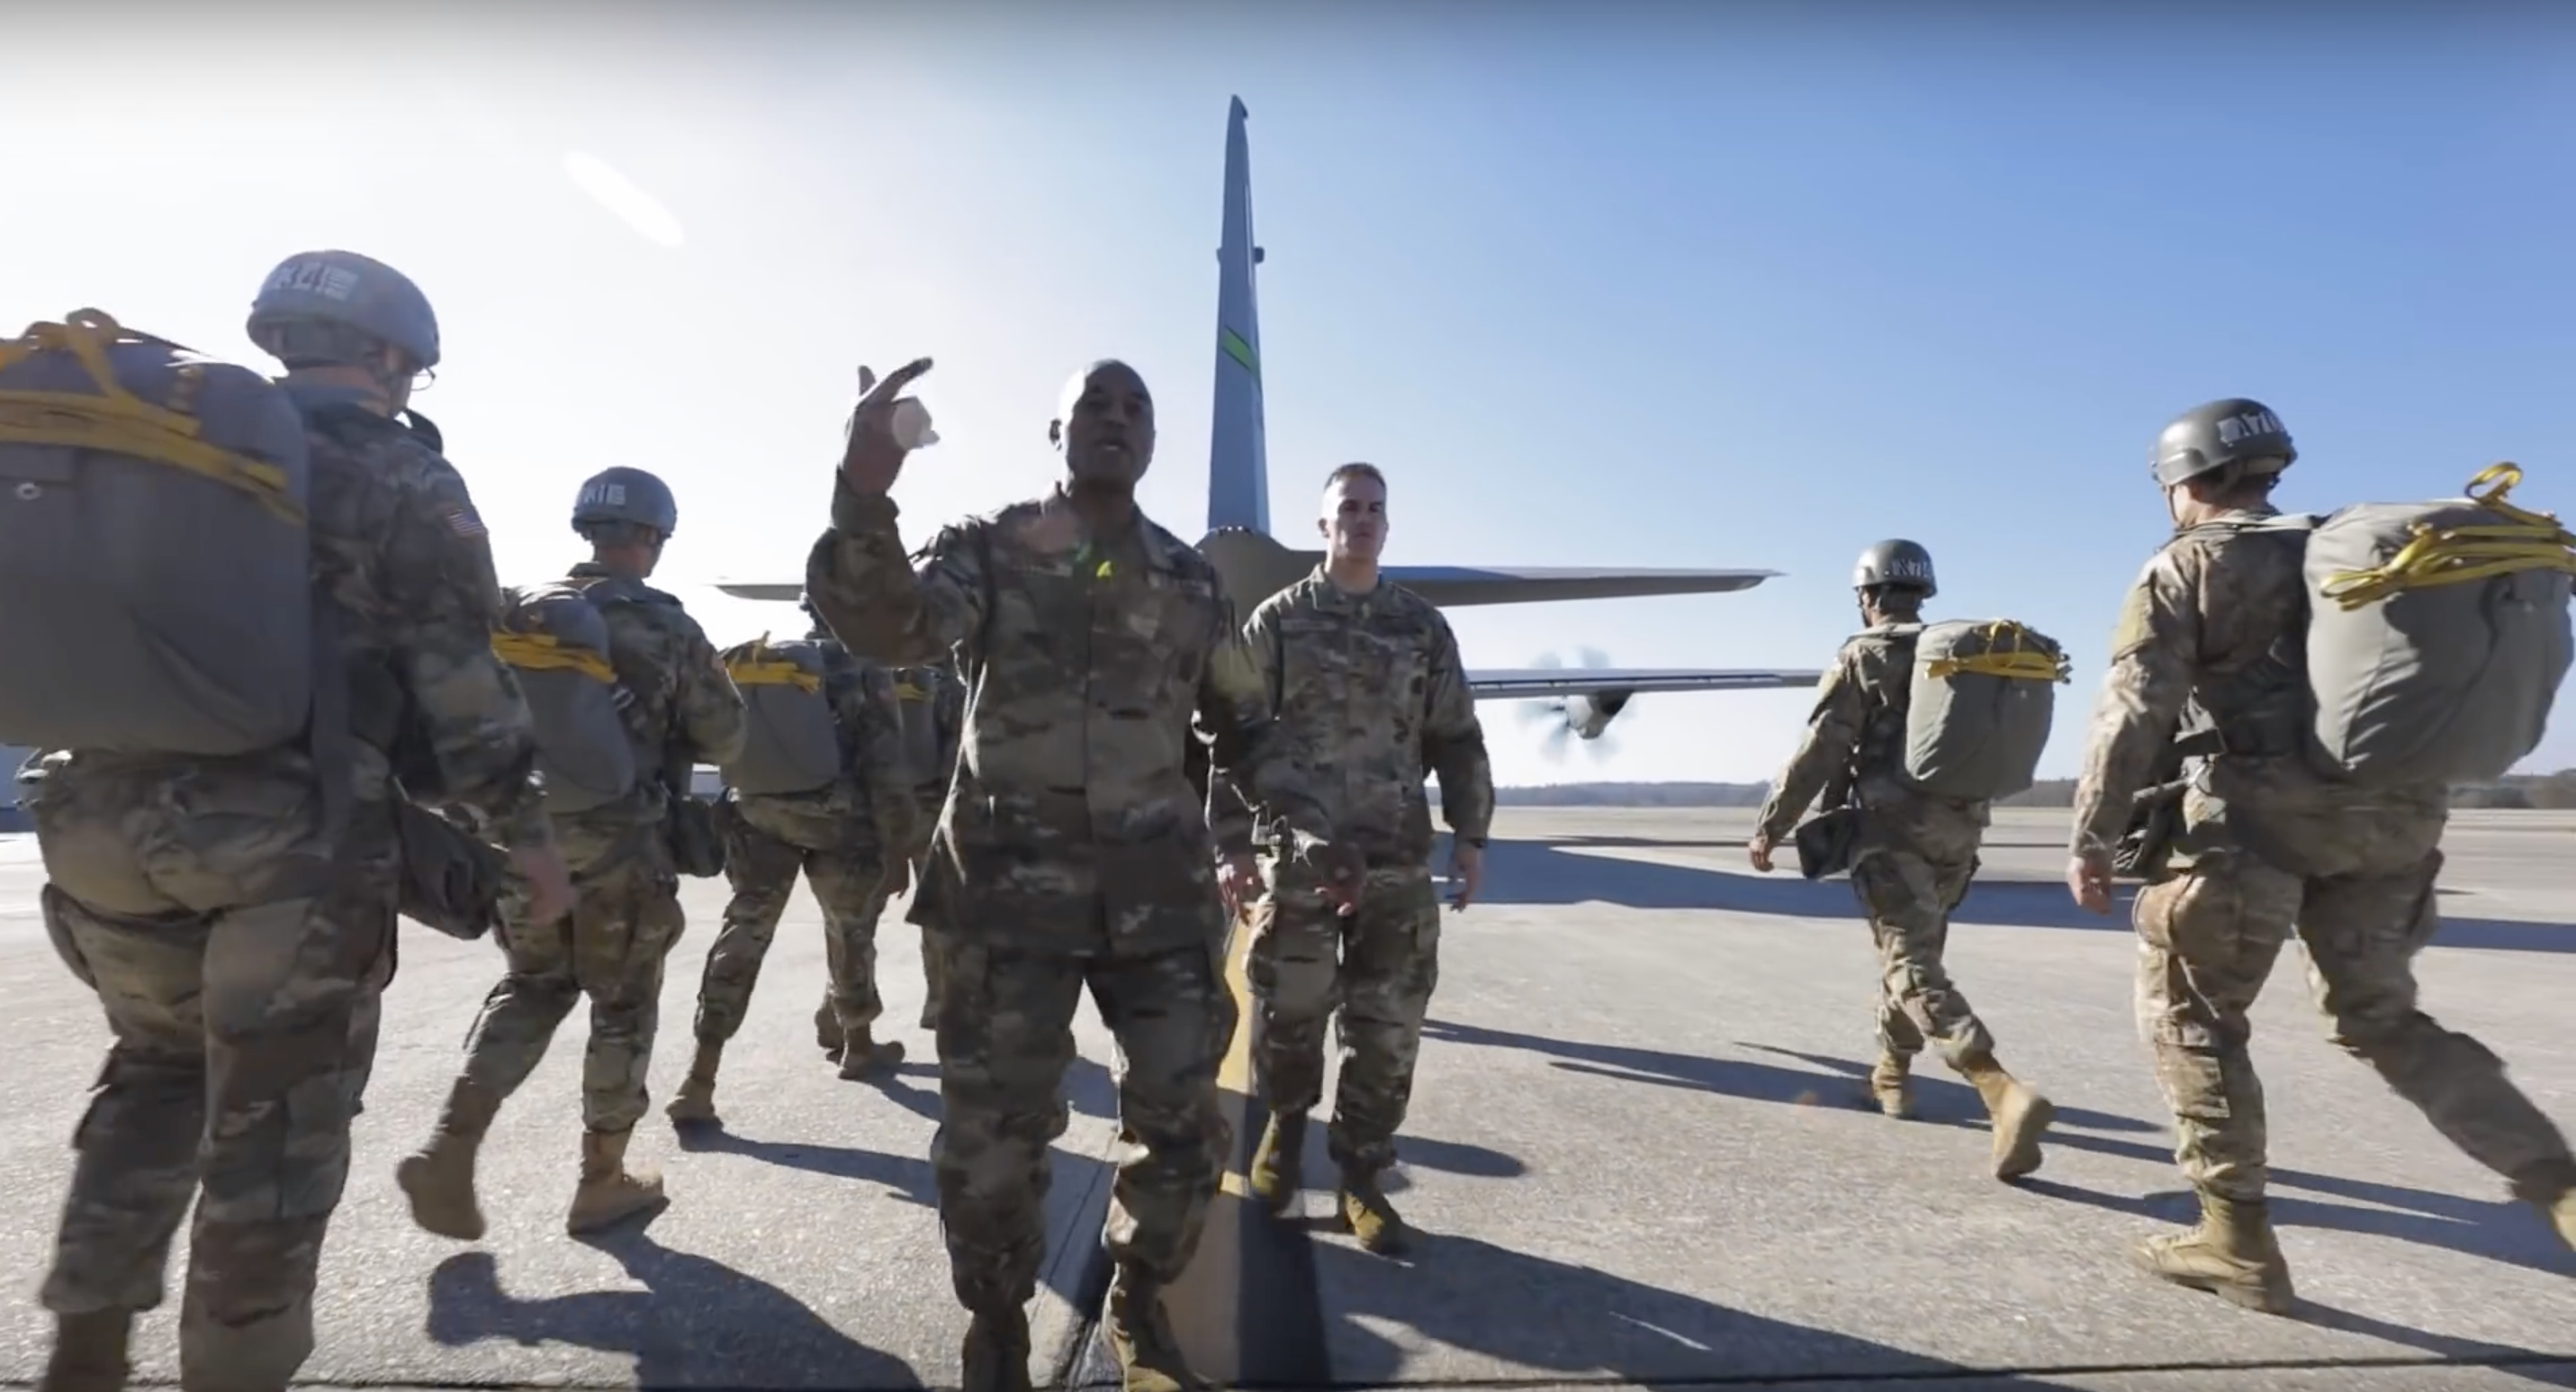 paratroopers walk to a plane behind two army men rapping to the camera